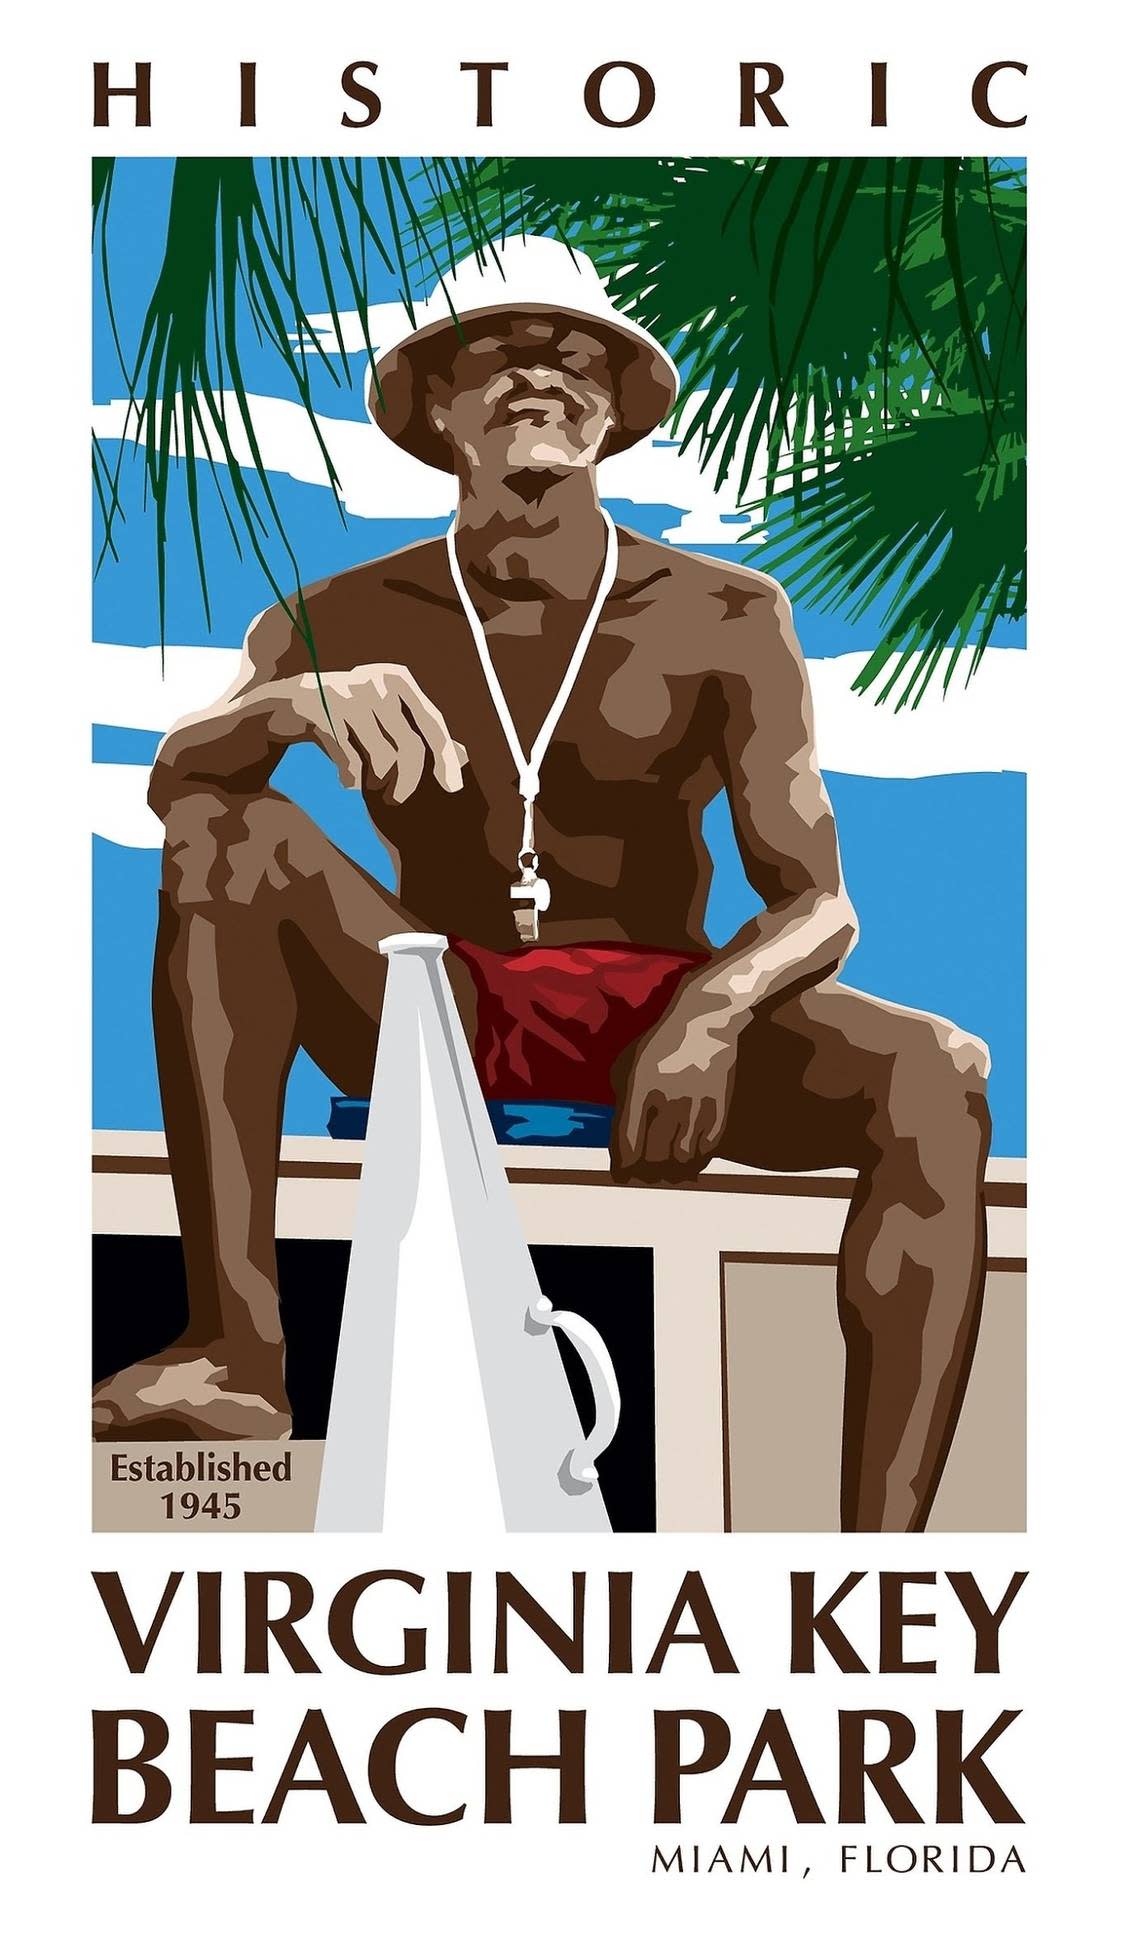 This one of several posters depicting beach life during the early years of the Historic Virginia Key Beach Park, founded in 1945 as a ‘Colored Only’ beach during Miami’s segregation. Photo courtesy of Virginia Key Beach Park Trust.